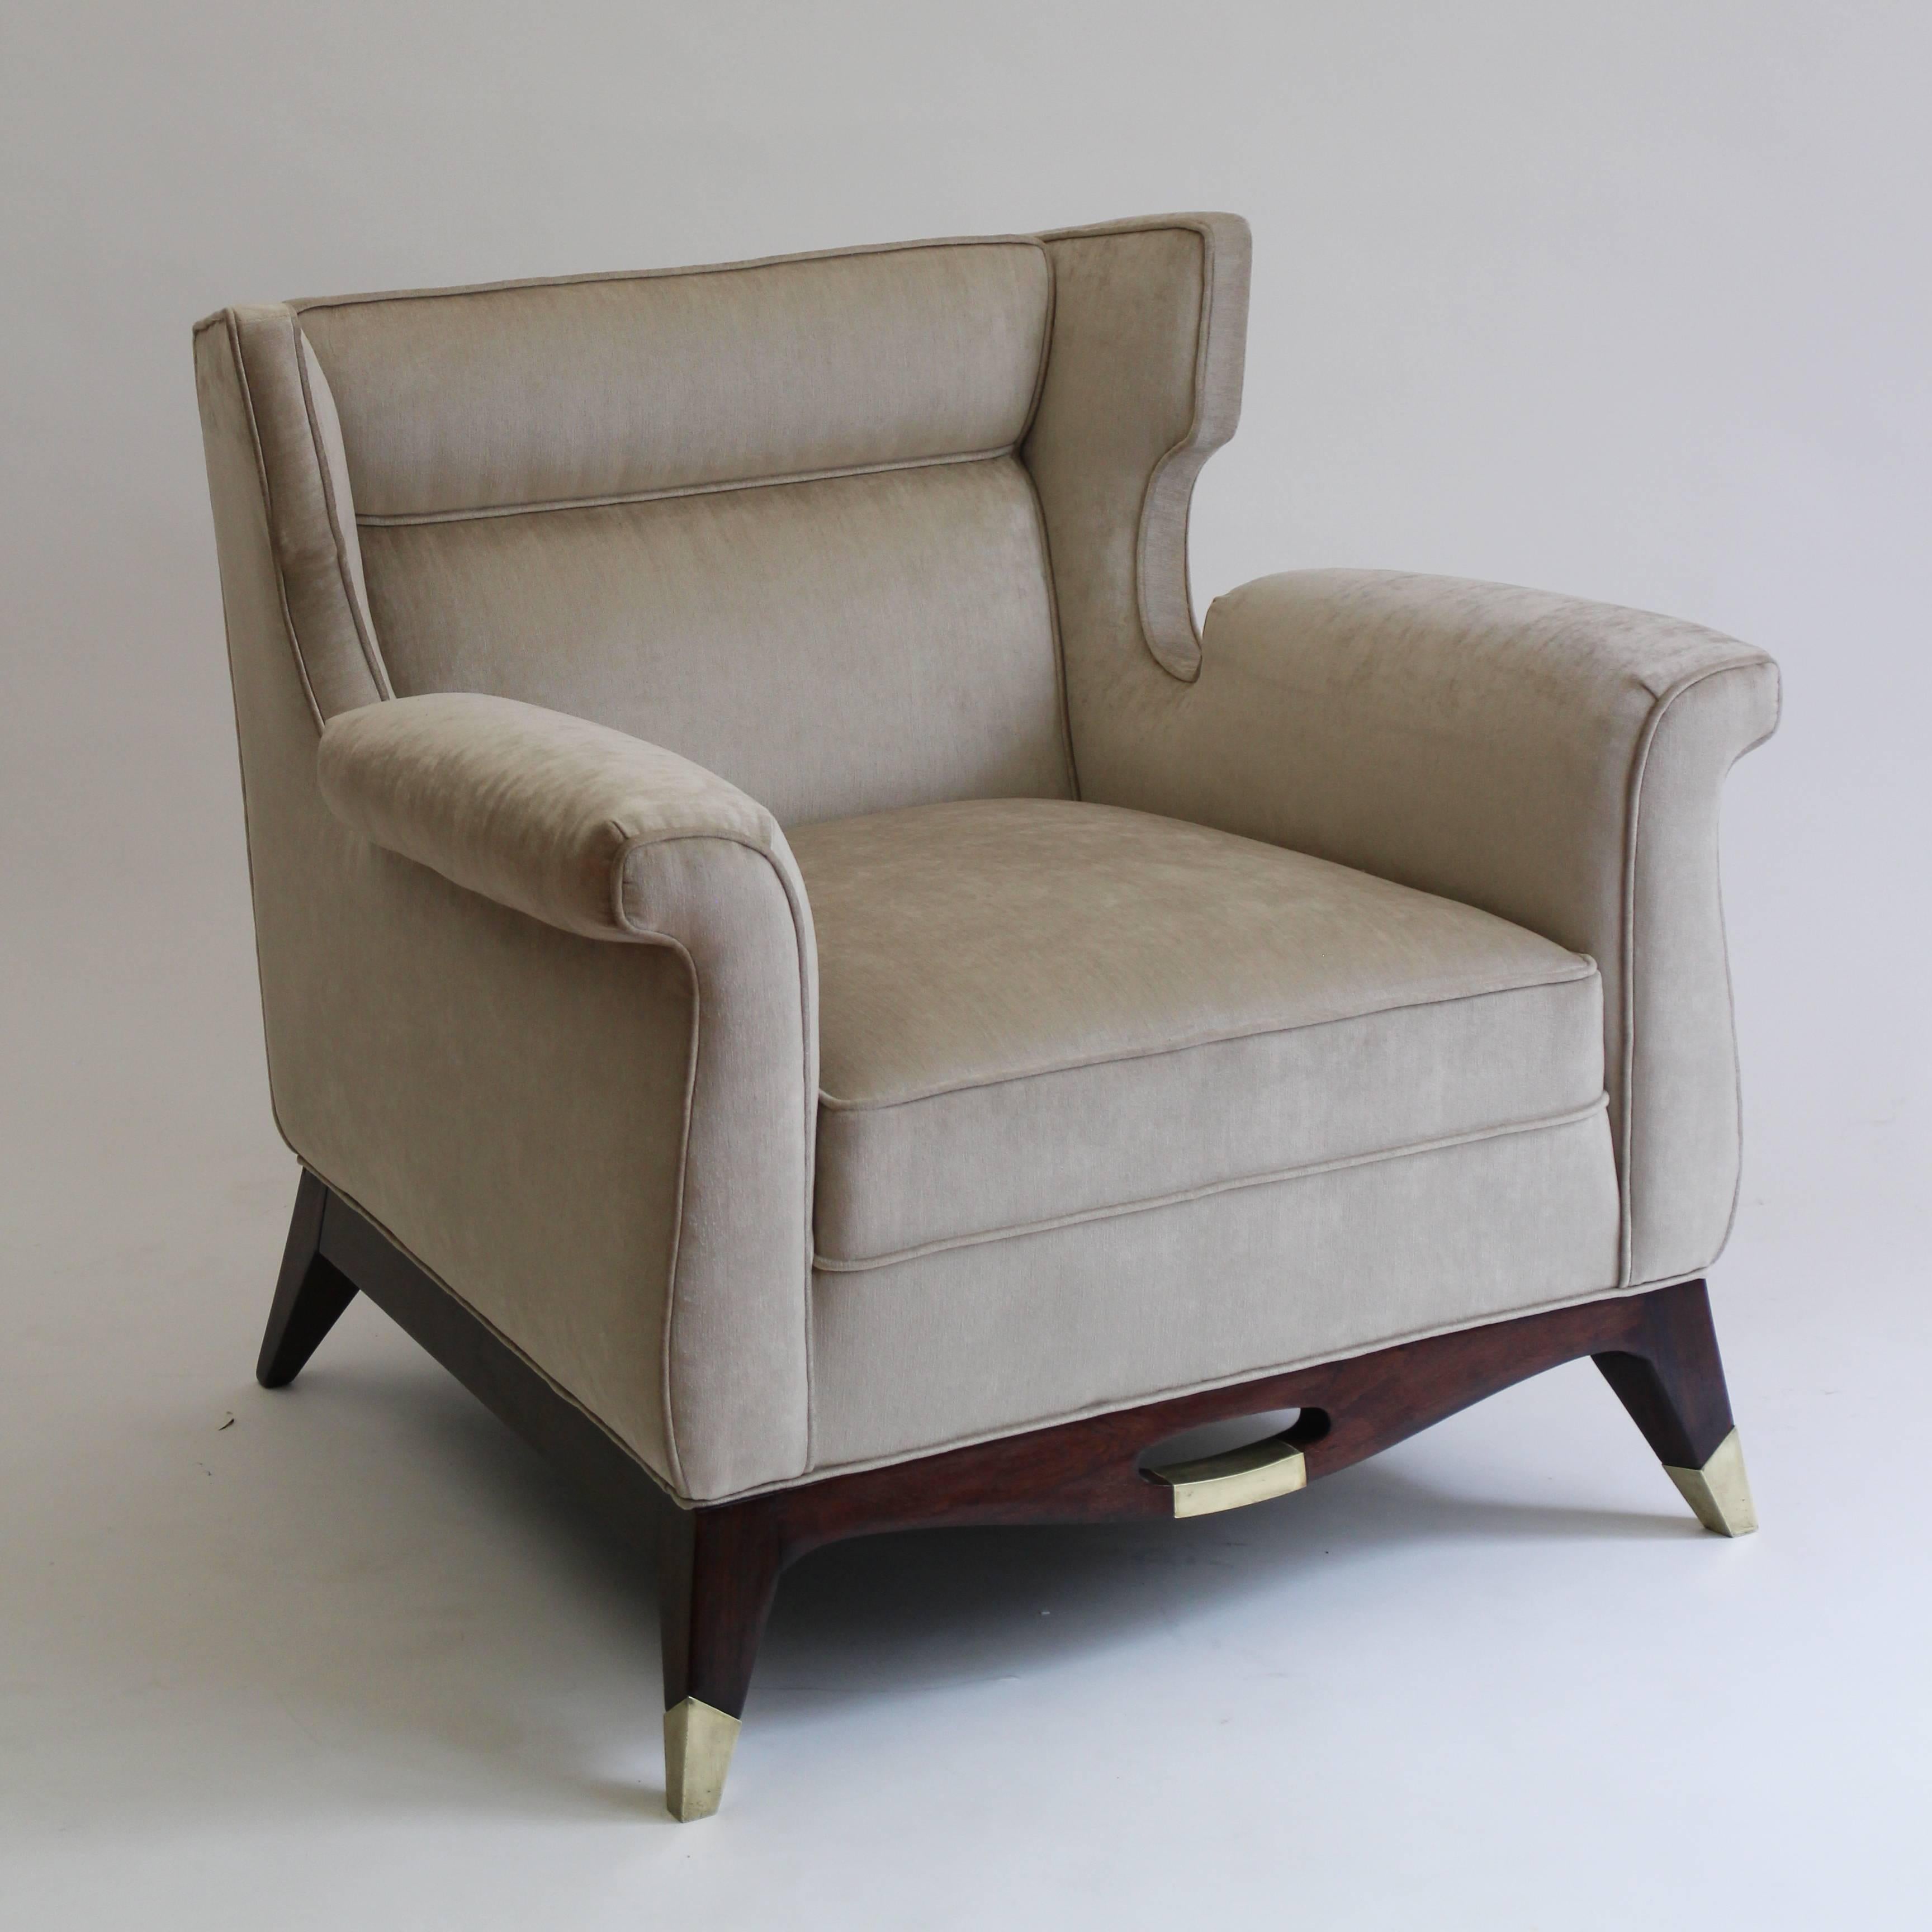 Luxurious and sophisticated pair of club chairs designed by Arturo Pani. Dyed mahogany, bronze sabots and front detail. 

Arturo Pani studied decoration and interior design at the School of Decorative Arts in Paris, and returned to Mexico by 1934